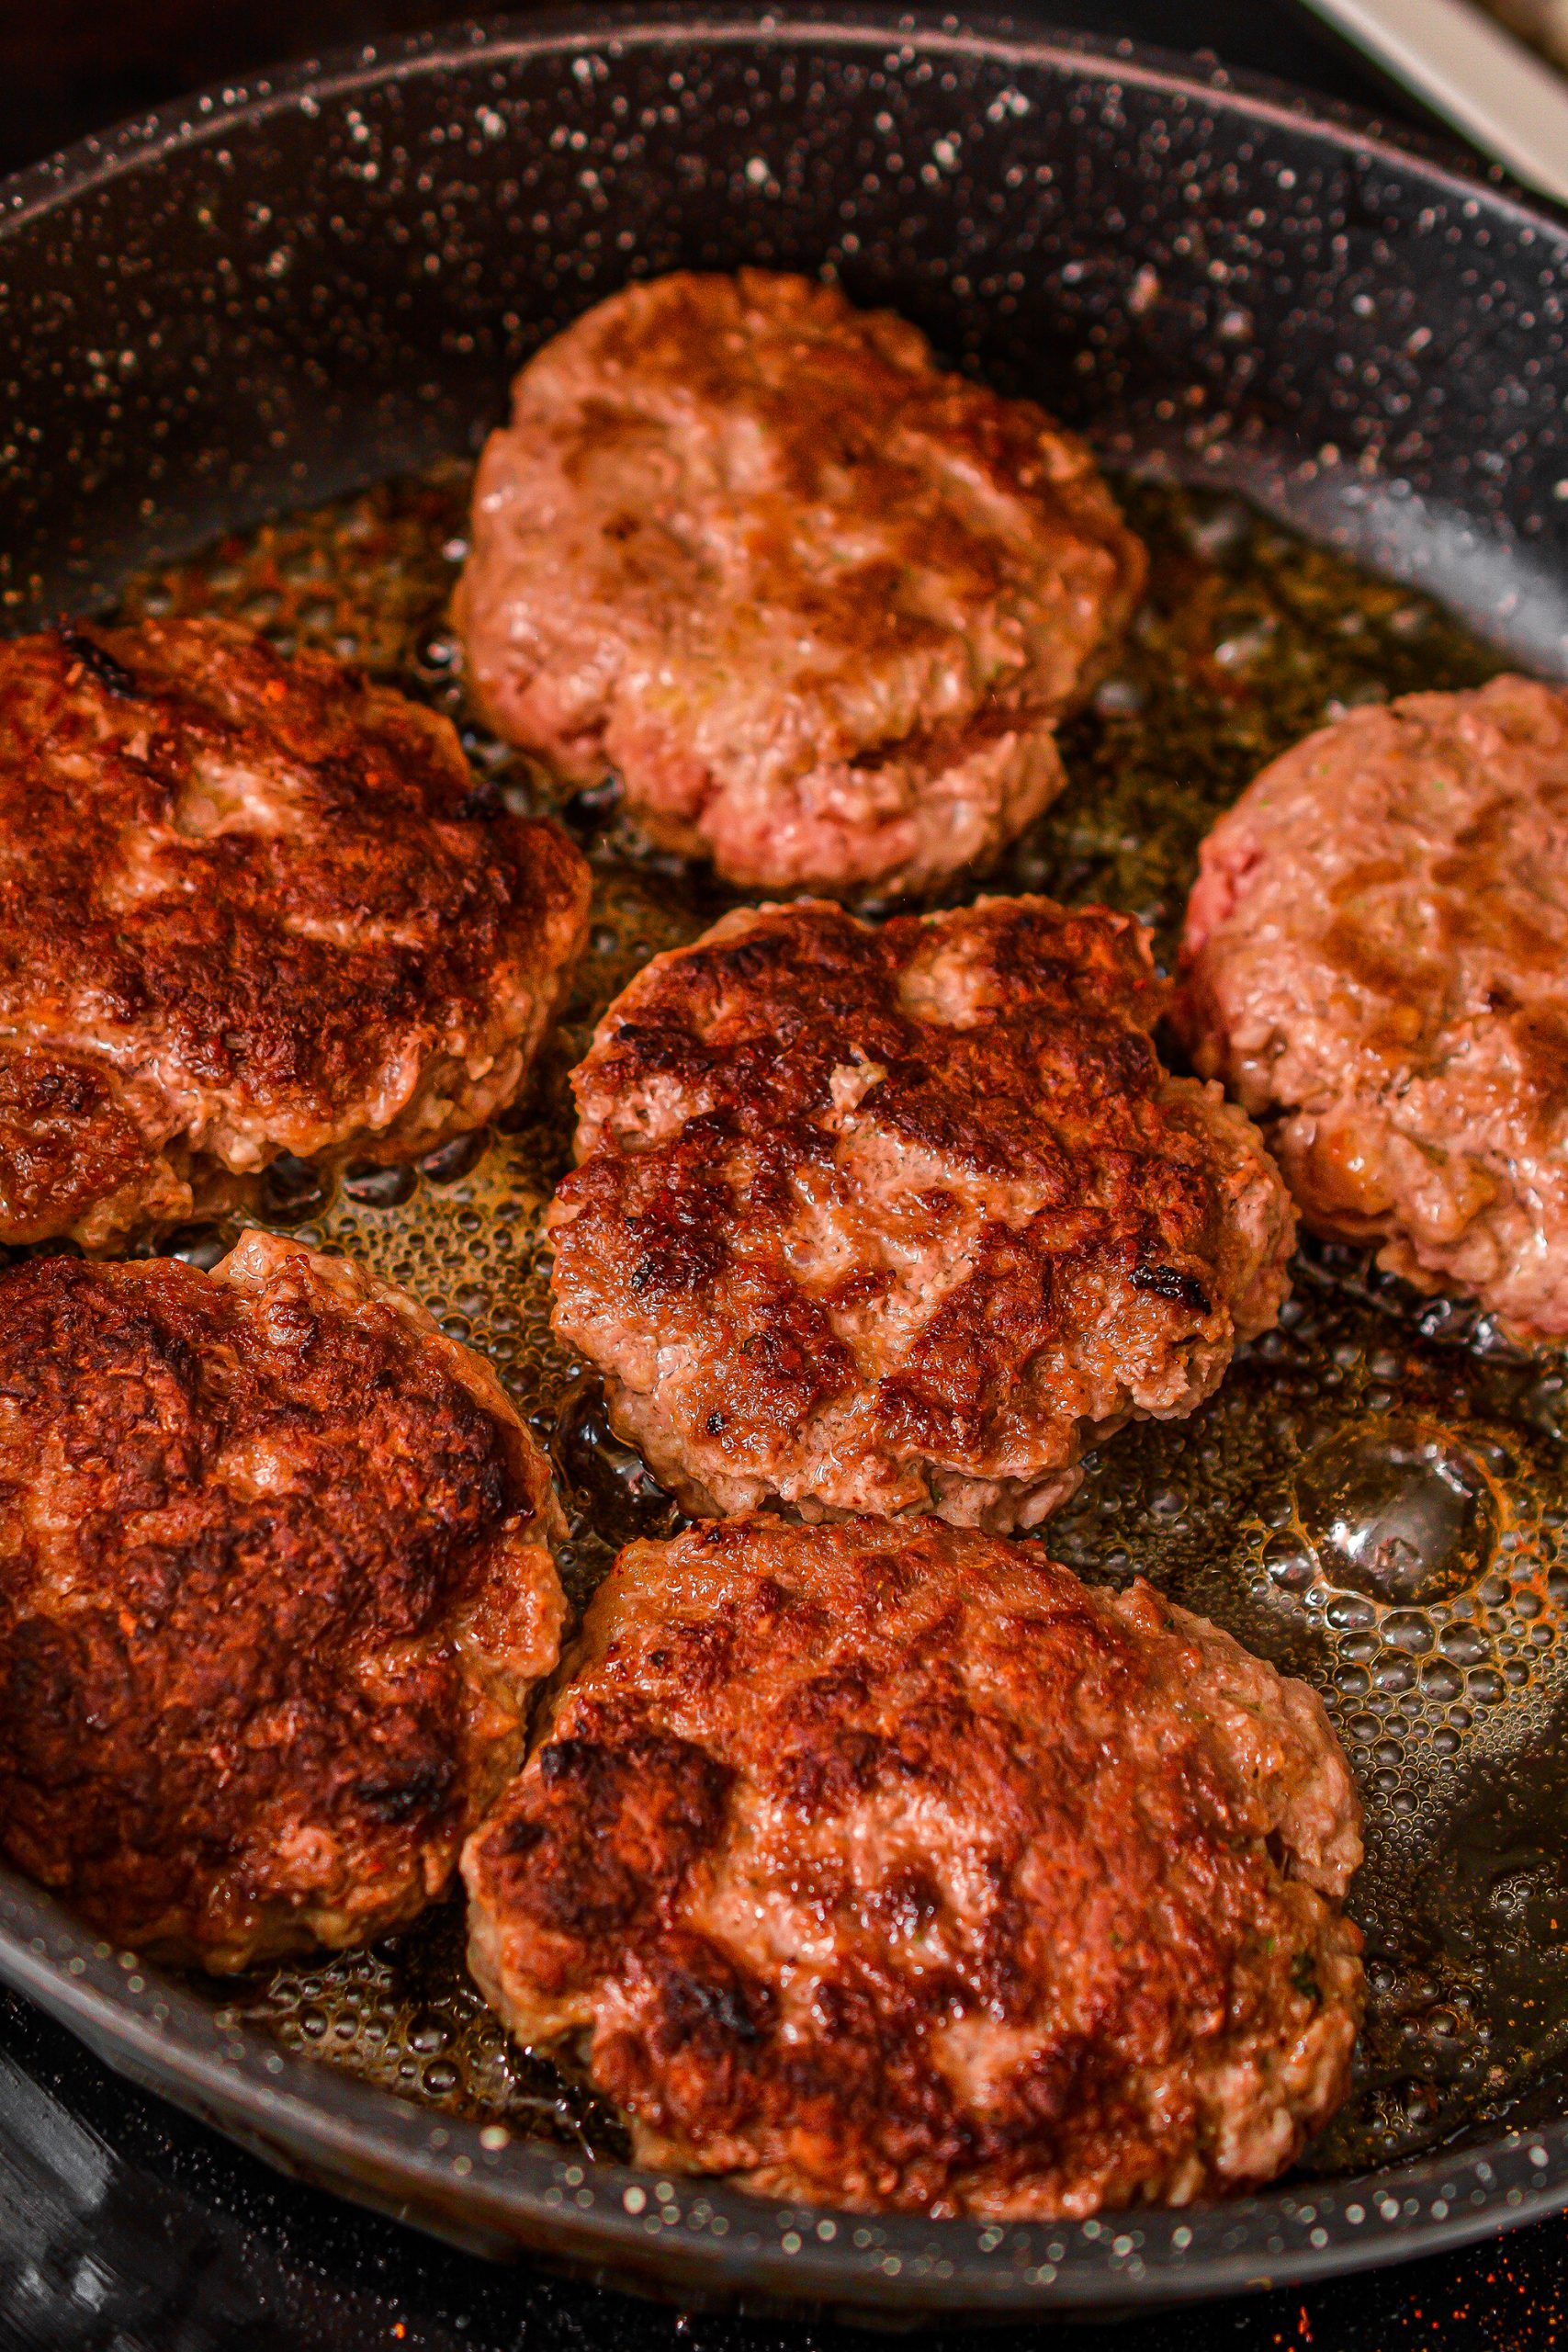 Pour the soup mixture over the browned patties in the skillet, reduce the heat to medium or medium-low, and simmer for 20 minutes covered.